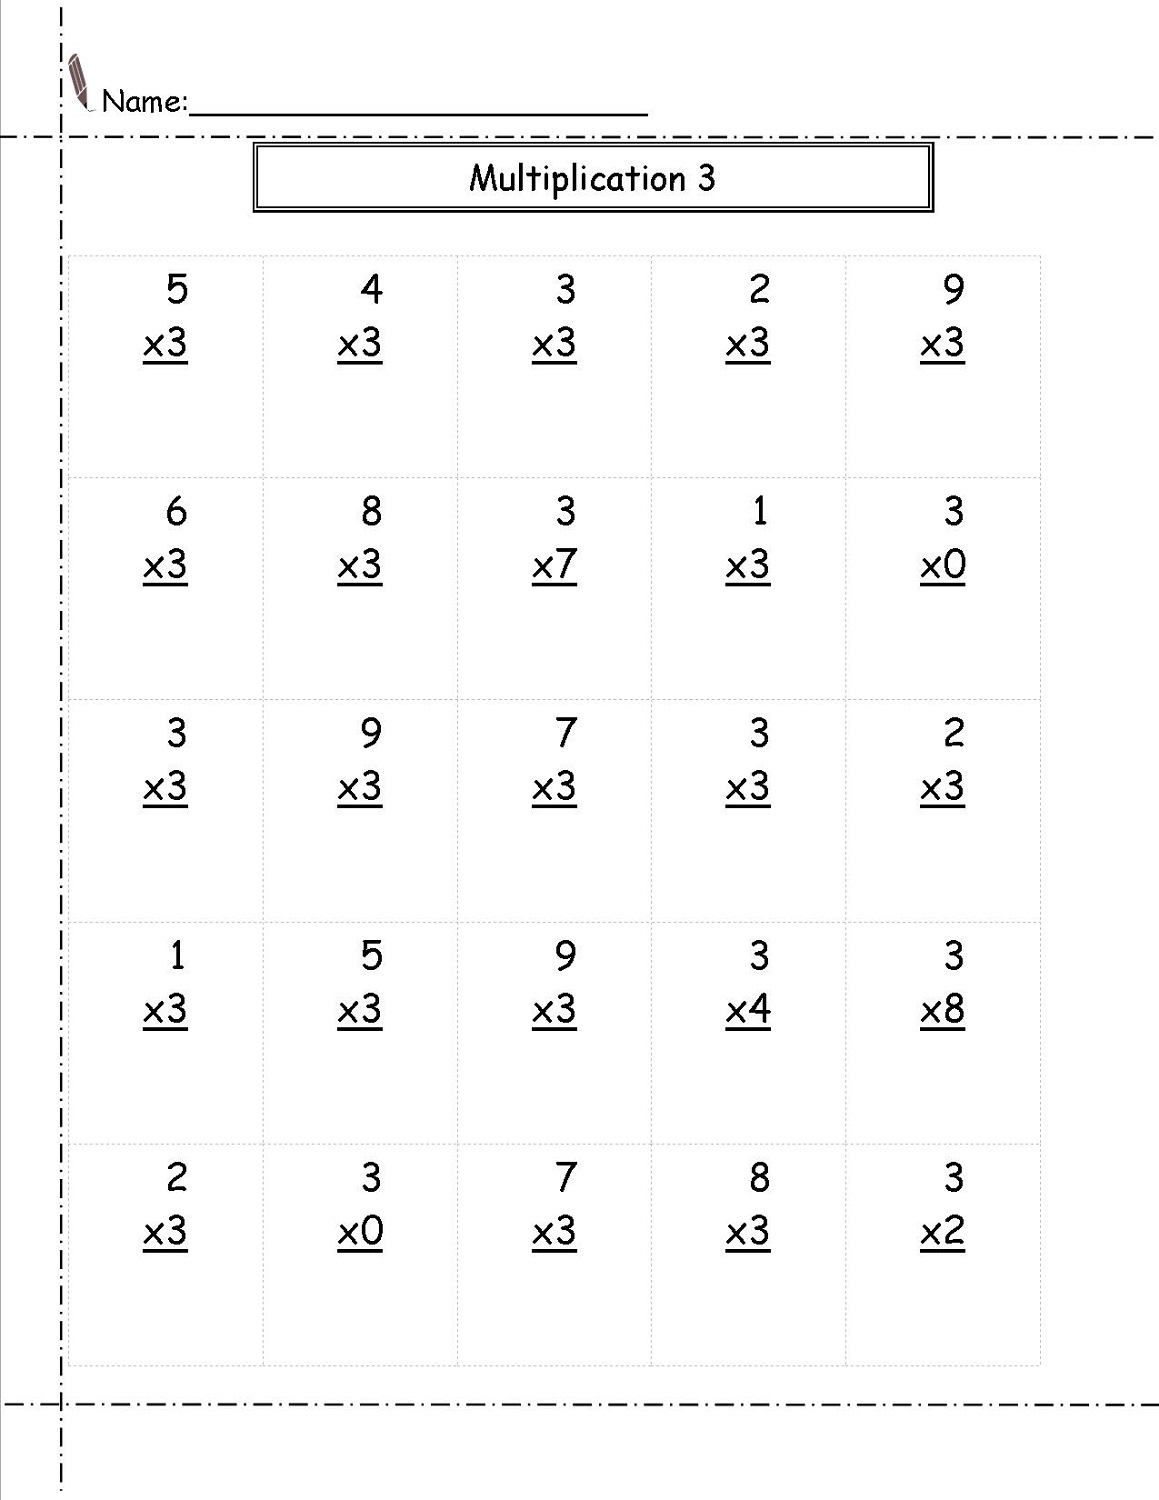 multiply-by-3-worksheets-printable-activity-shelter